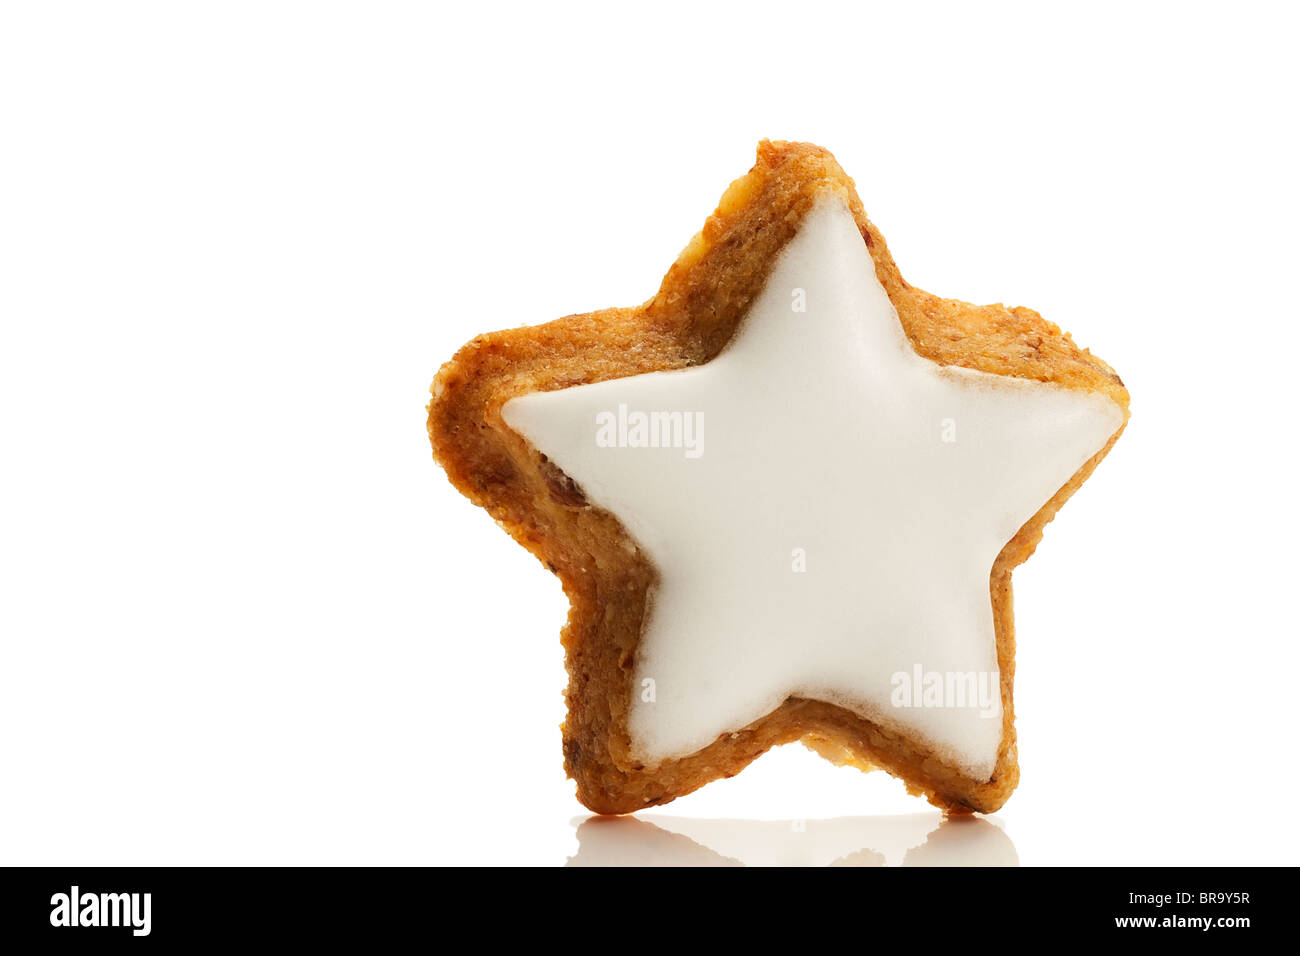 one star shaped cinnamon biscuit on white background Stock Photo